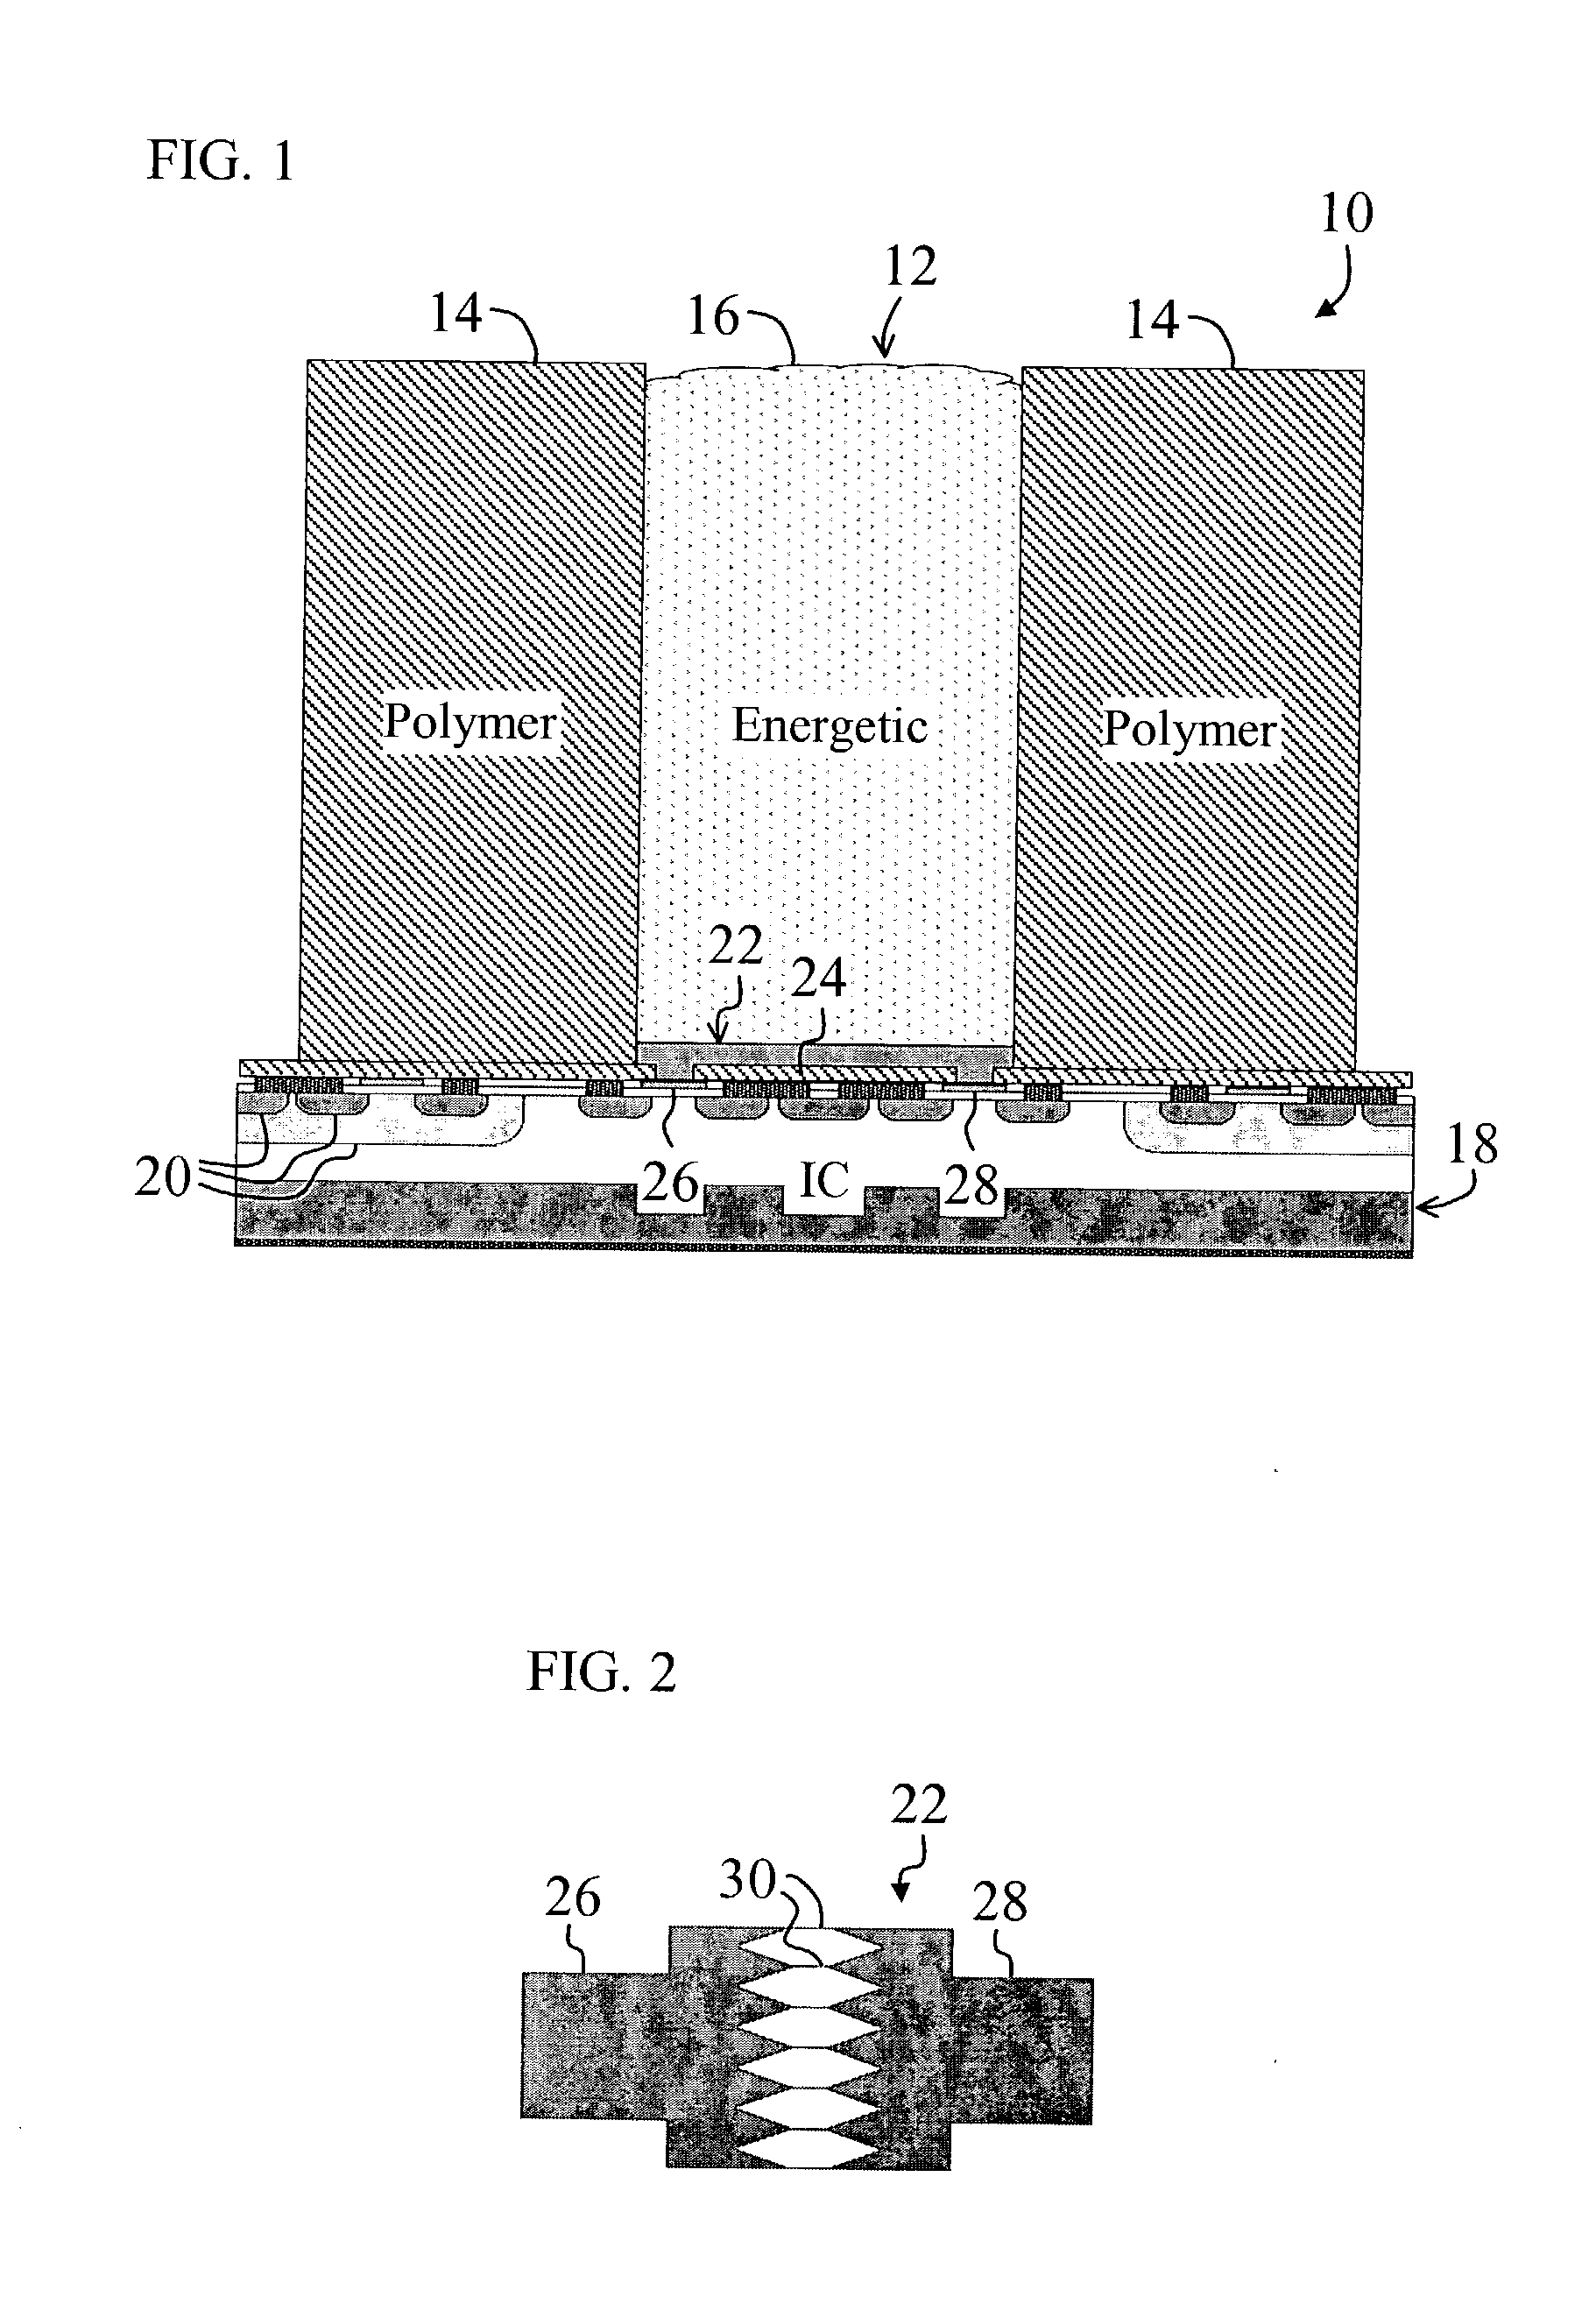 Versatile cavity actuator and systems incorporating same